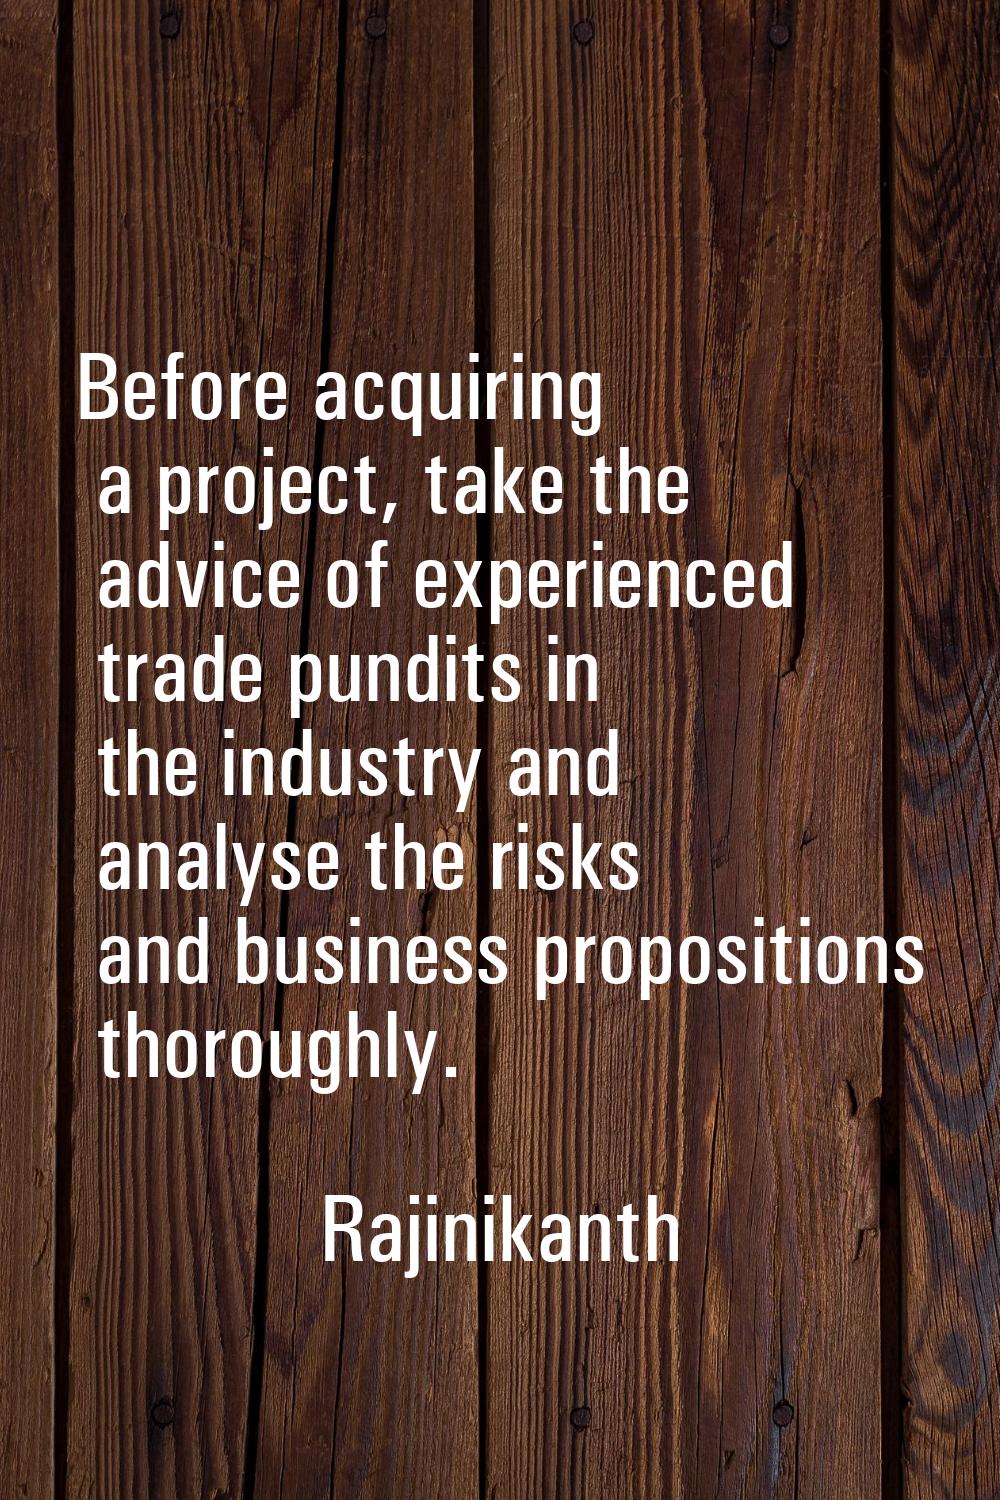 Before acquiring a project, take the advice of experienced trade pundits in the industry and analys